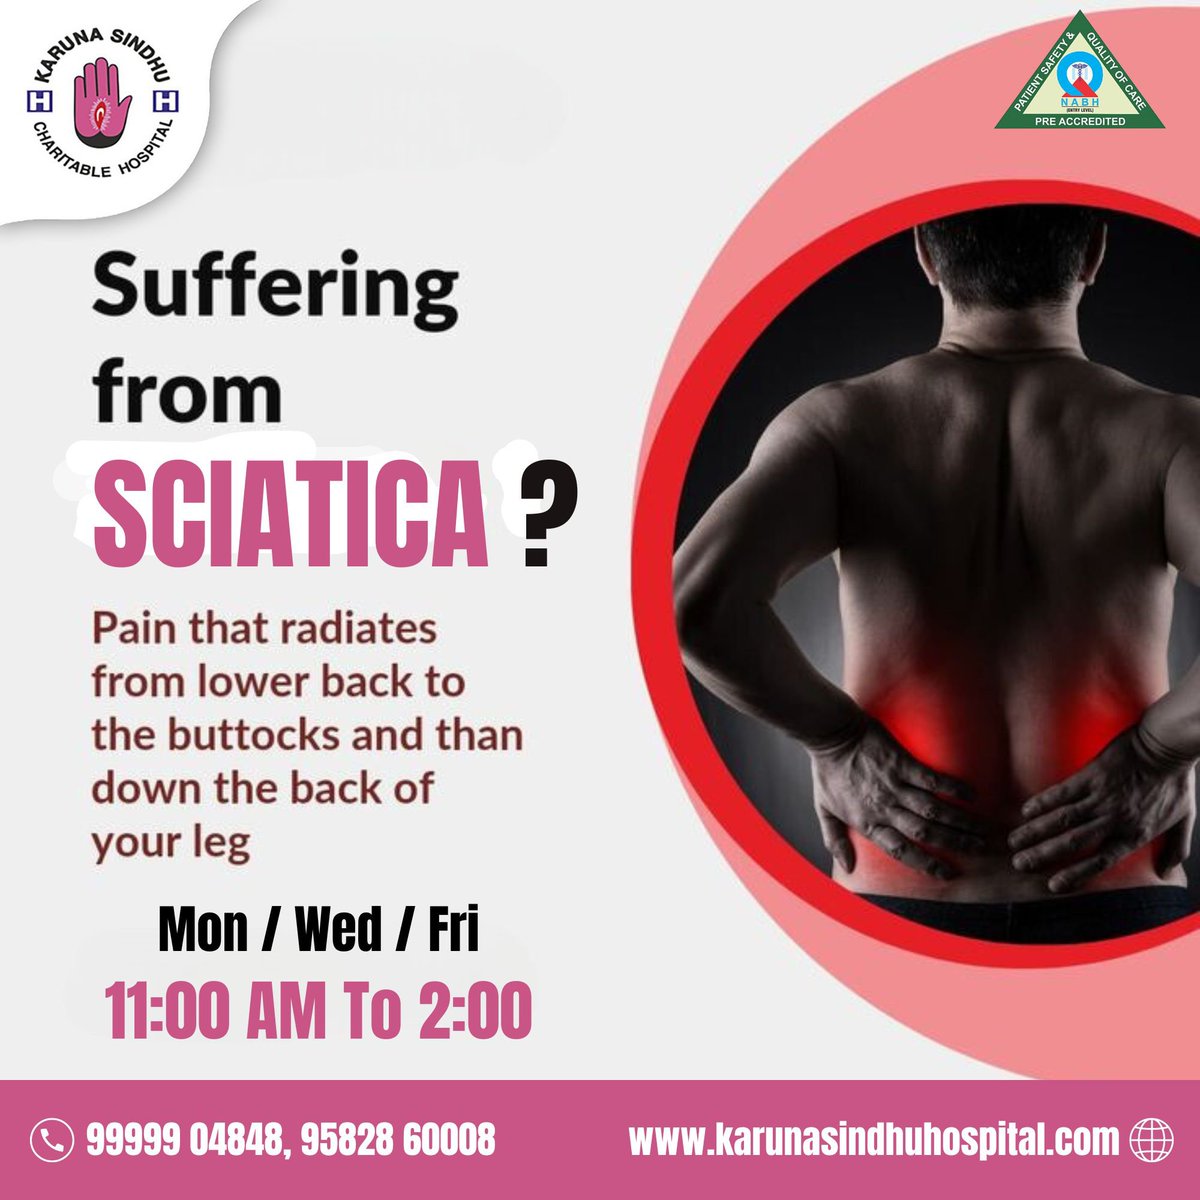 Empowering you with knowledge: Recognizing sciatica symptoms for timely care and relief at Karuna Sindhu Hospital.🏥

Call: 9999904848
Visit :  karunasindhuhospital.com/orthopedic

#KarunaSindhuHospital #SciaticaAwareness #Healthcare #MedicalCare #SciaticaRelief #PainManagement #Orthopaedic